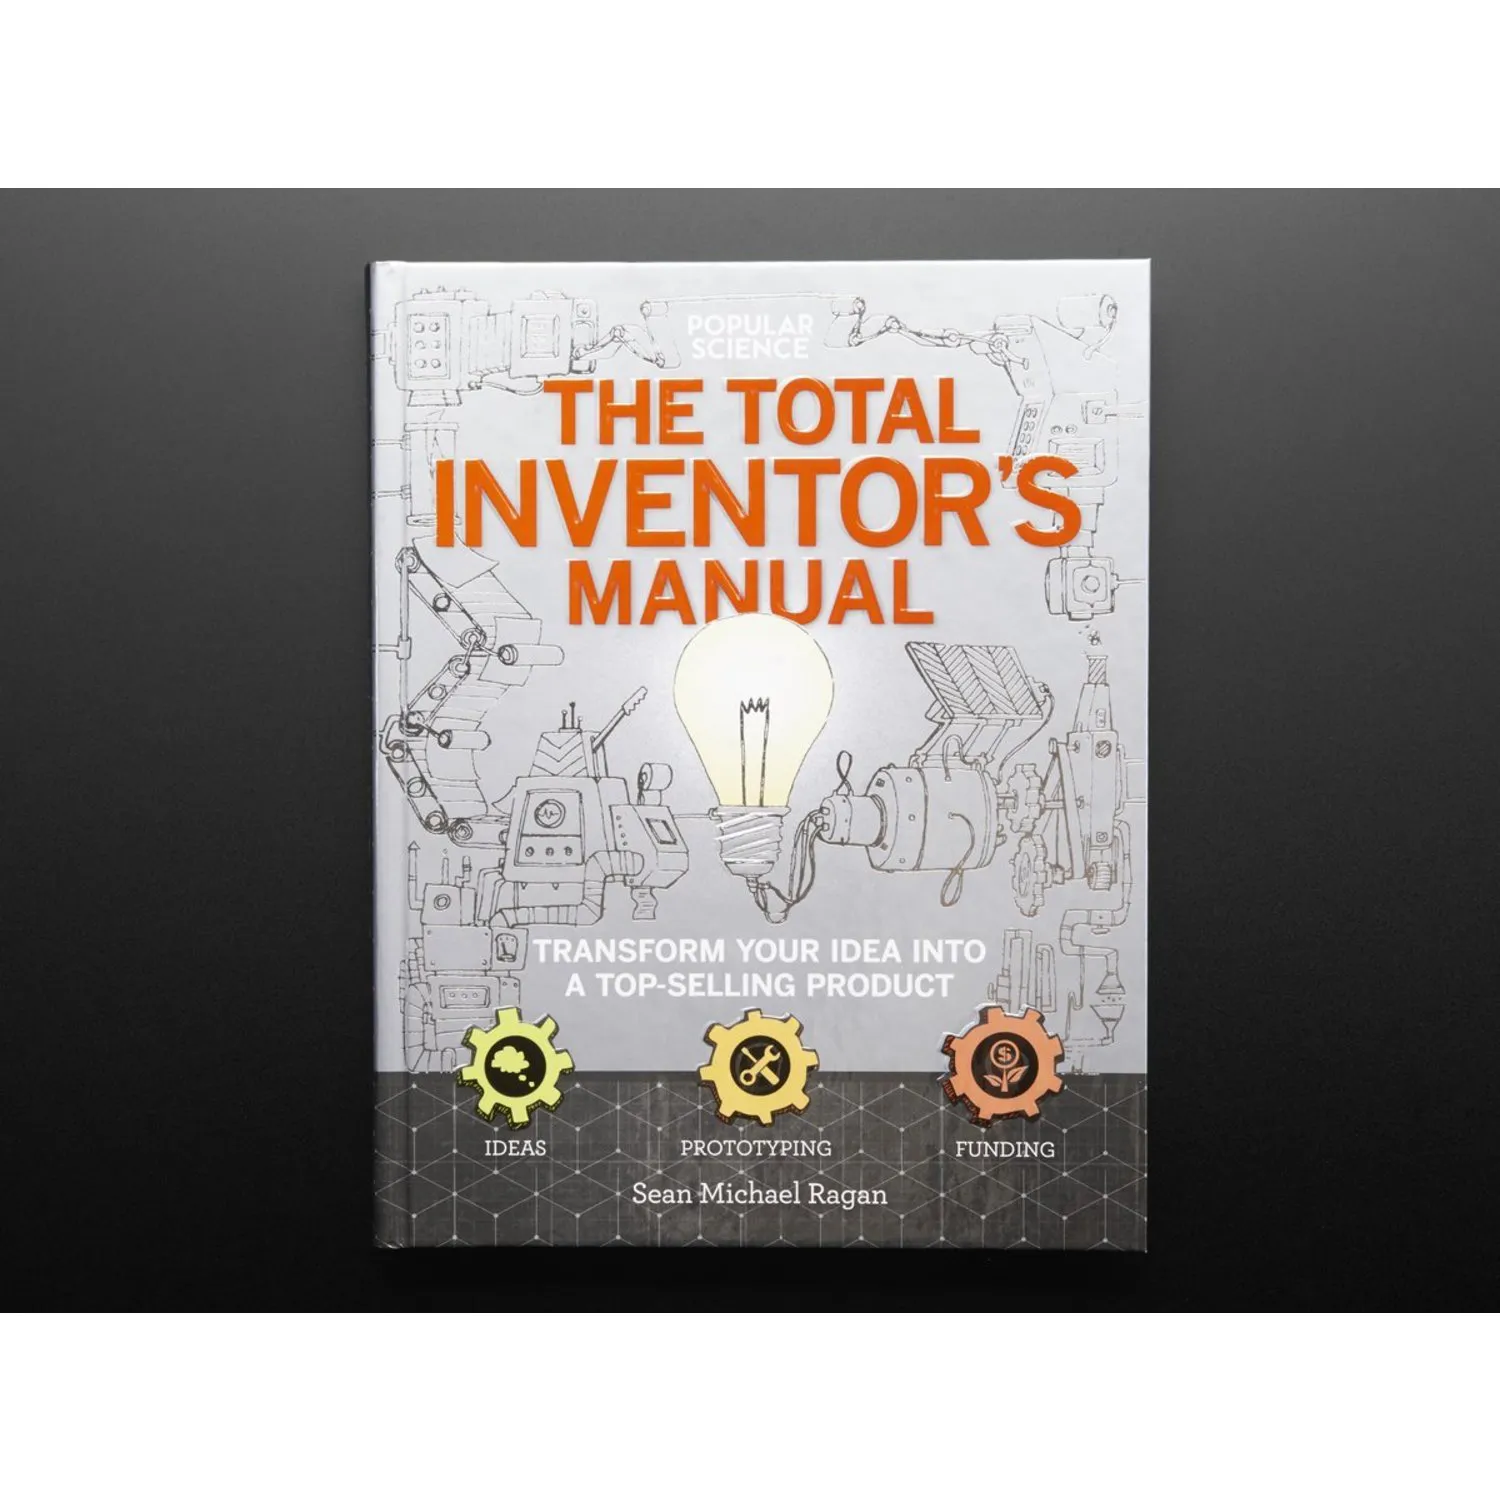 Photo of The Total Inventor's Manual by Sean Michael Ragan